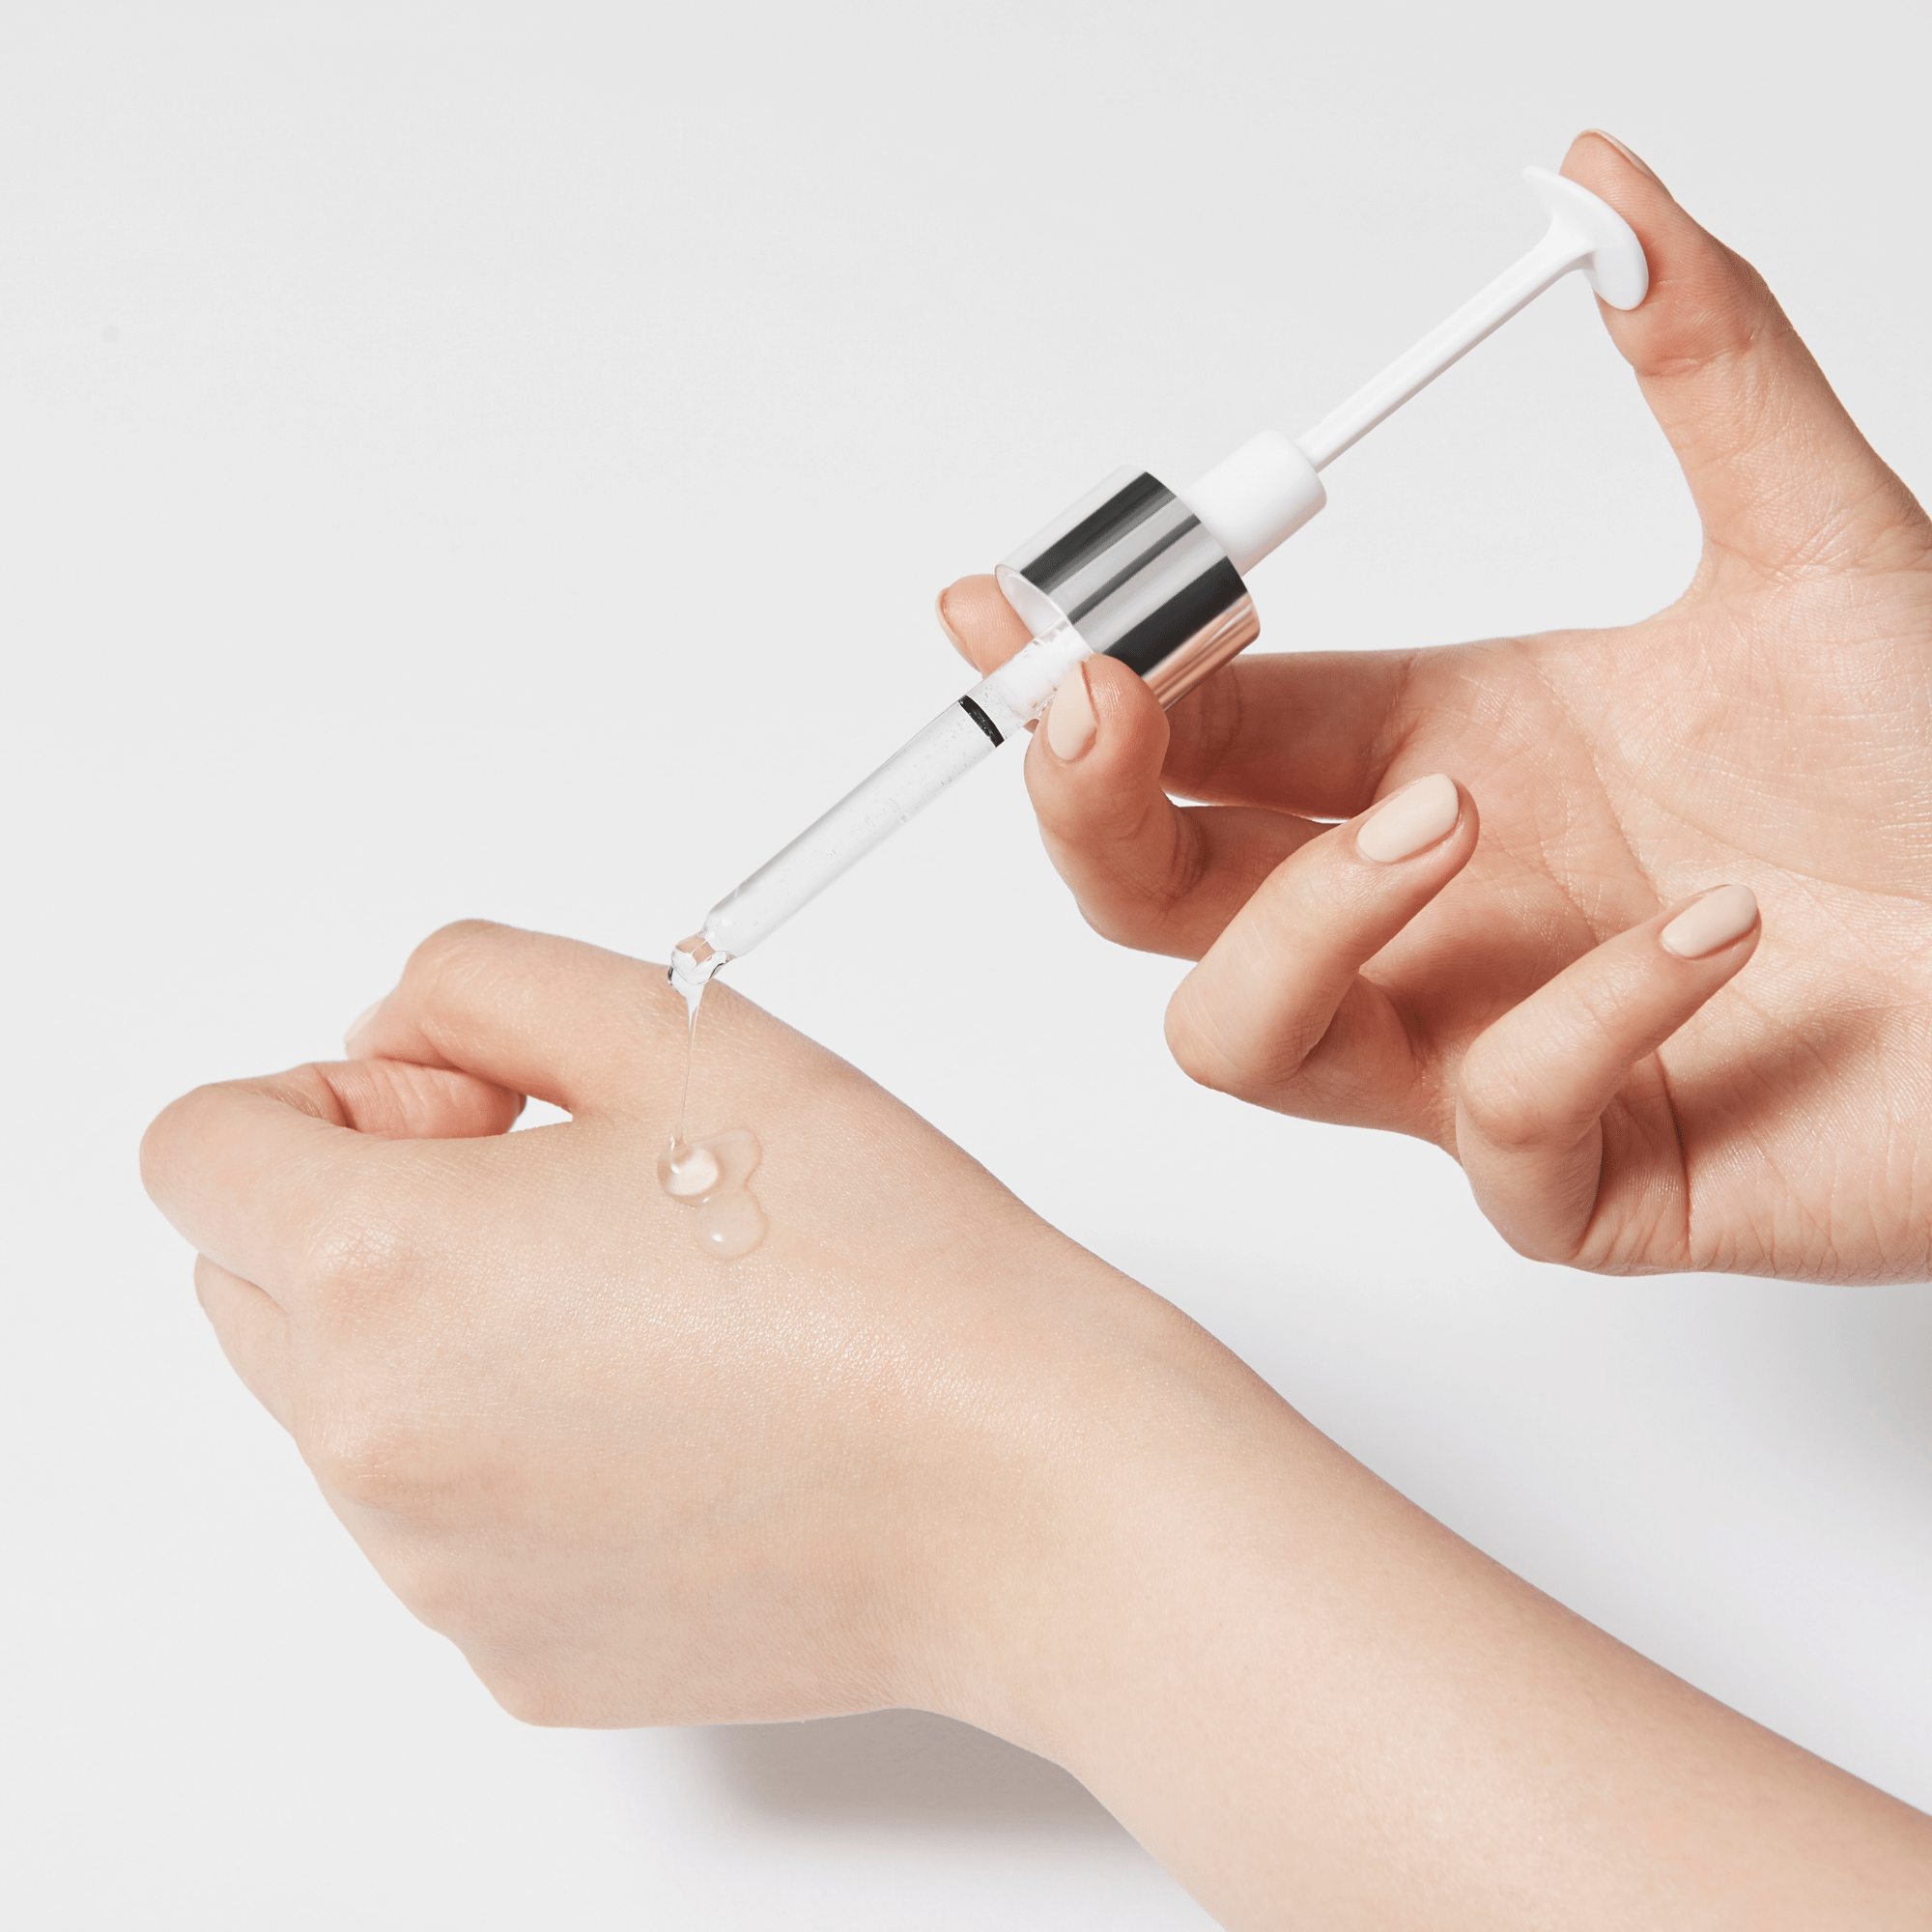 rejuran malaysia turnover ampoule premium rejuvenating solution containing 5,000 ppm of highly concentrated c-PDRN. With tested efficacy, this ‘Return Ampoule’ returns your skin to its natural healthy state